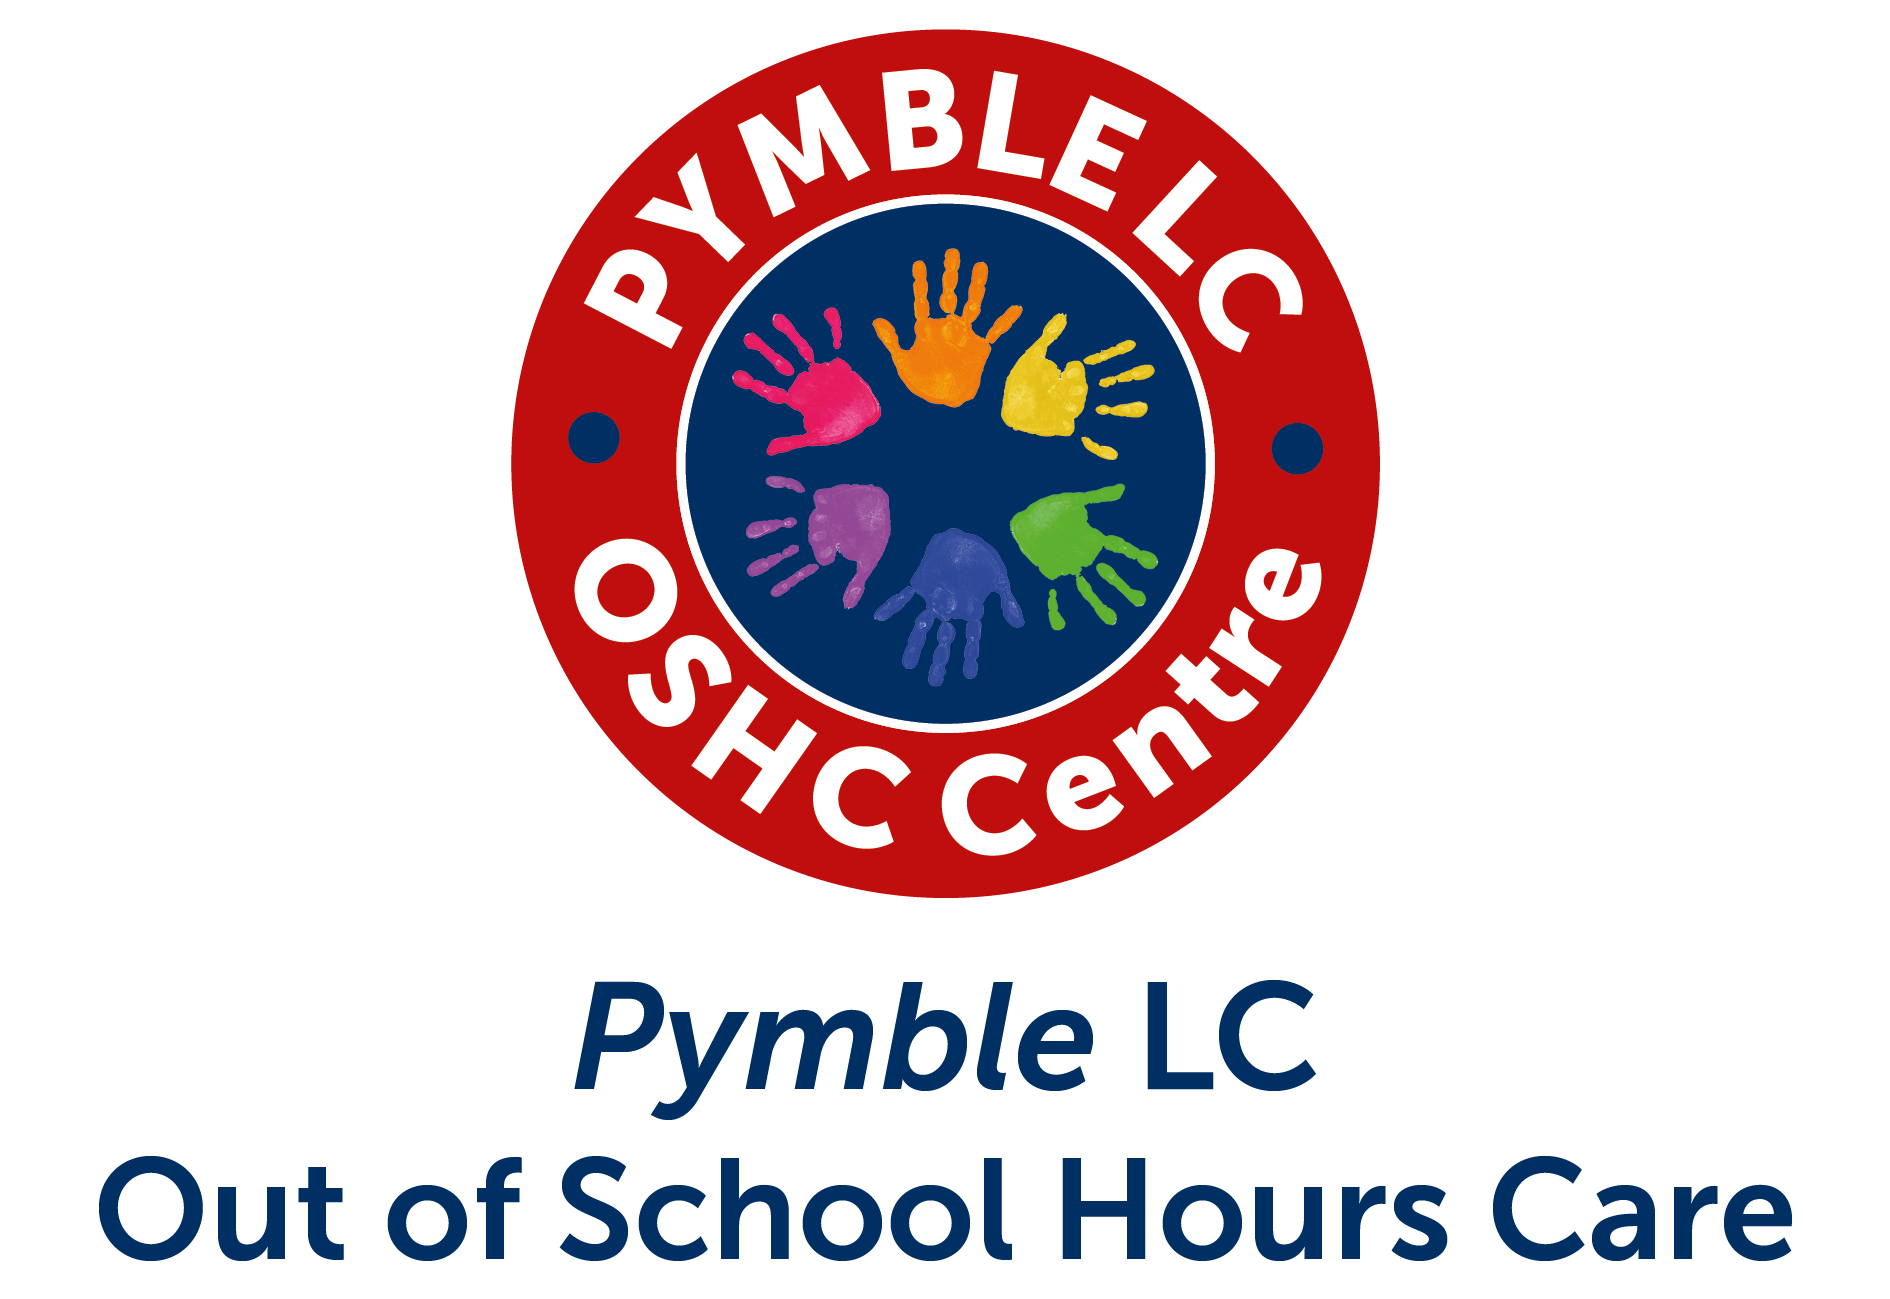 Pymble LC Out of School Hours Care